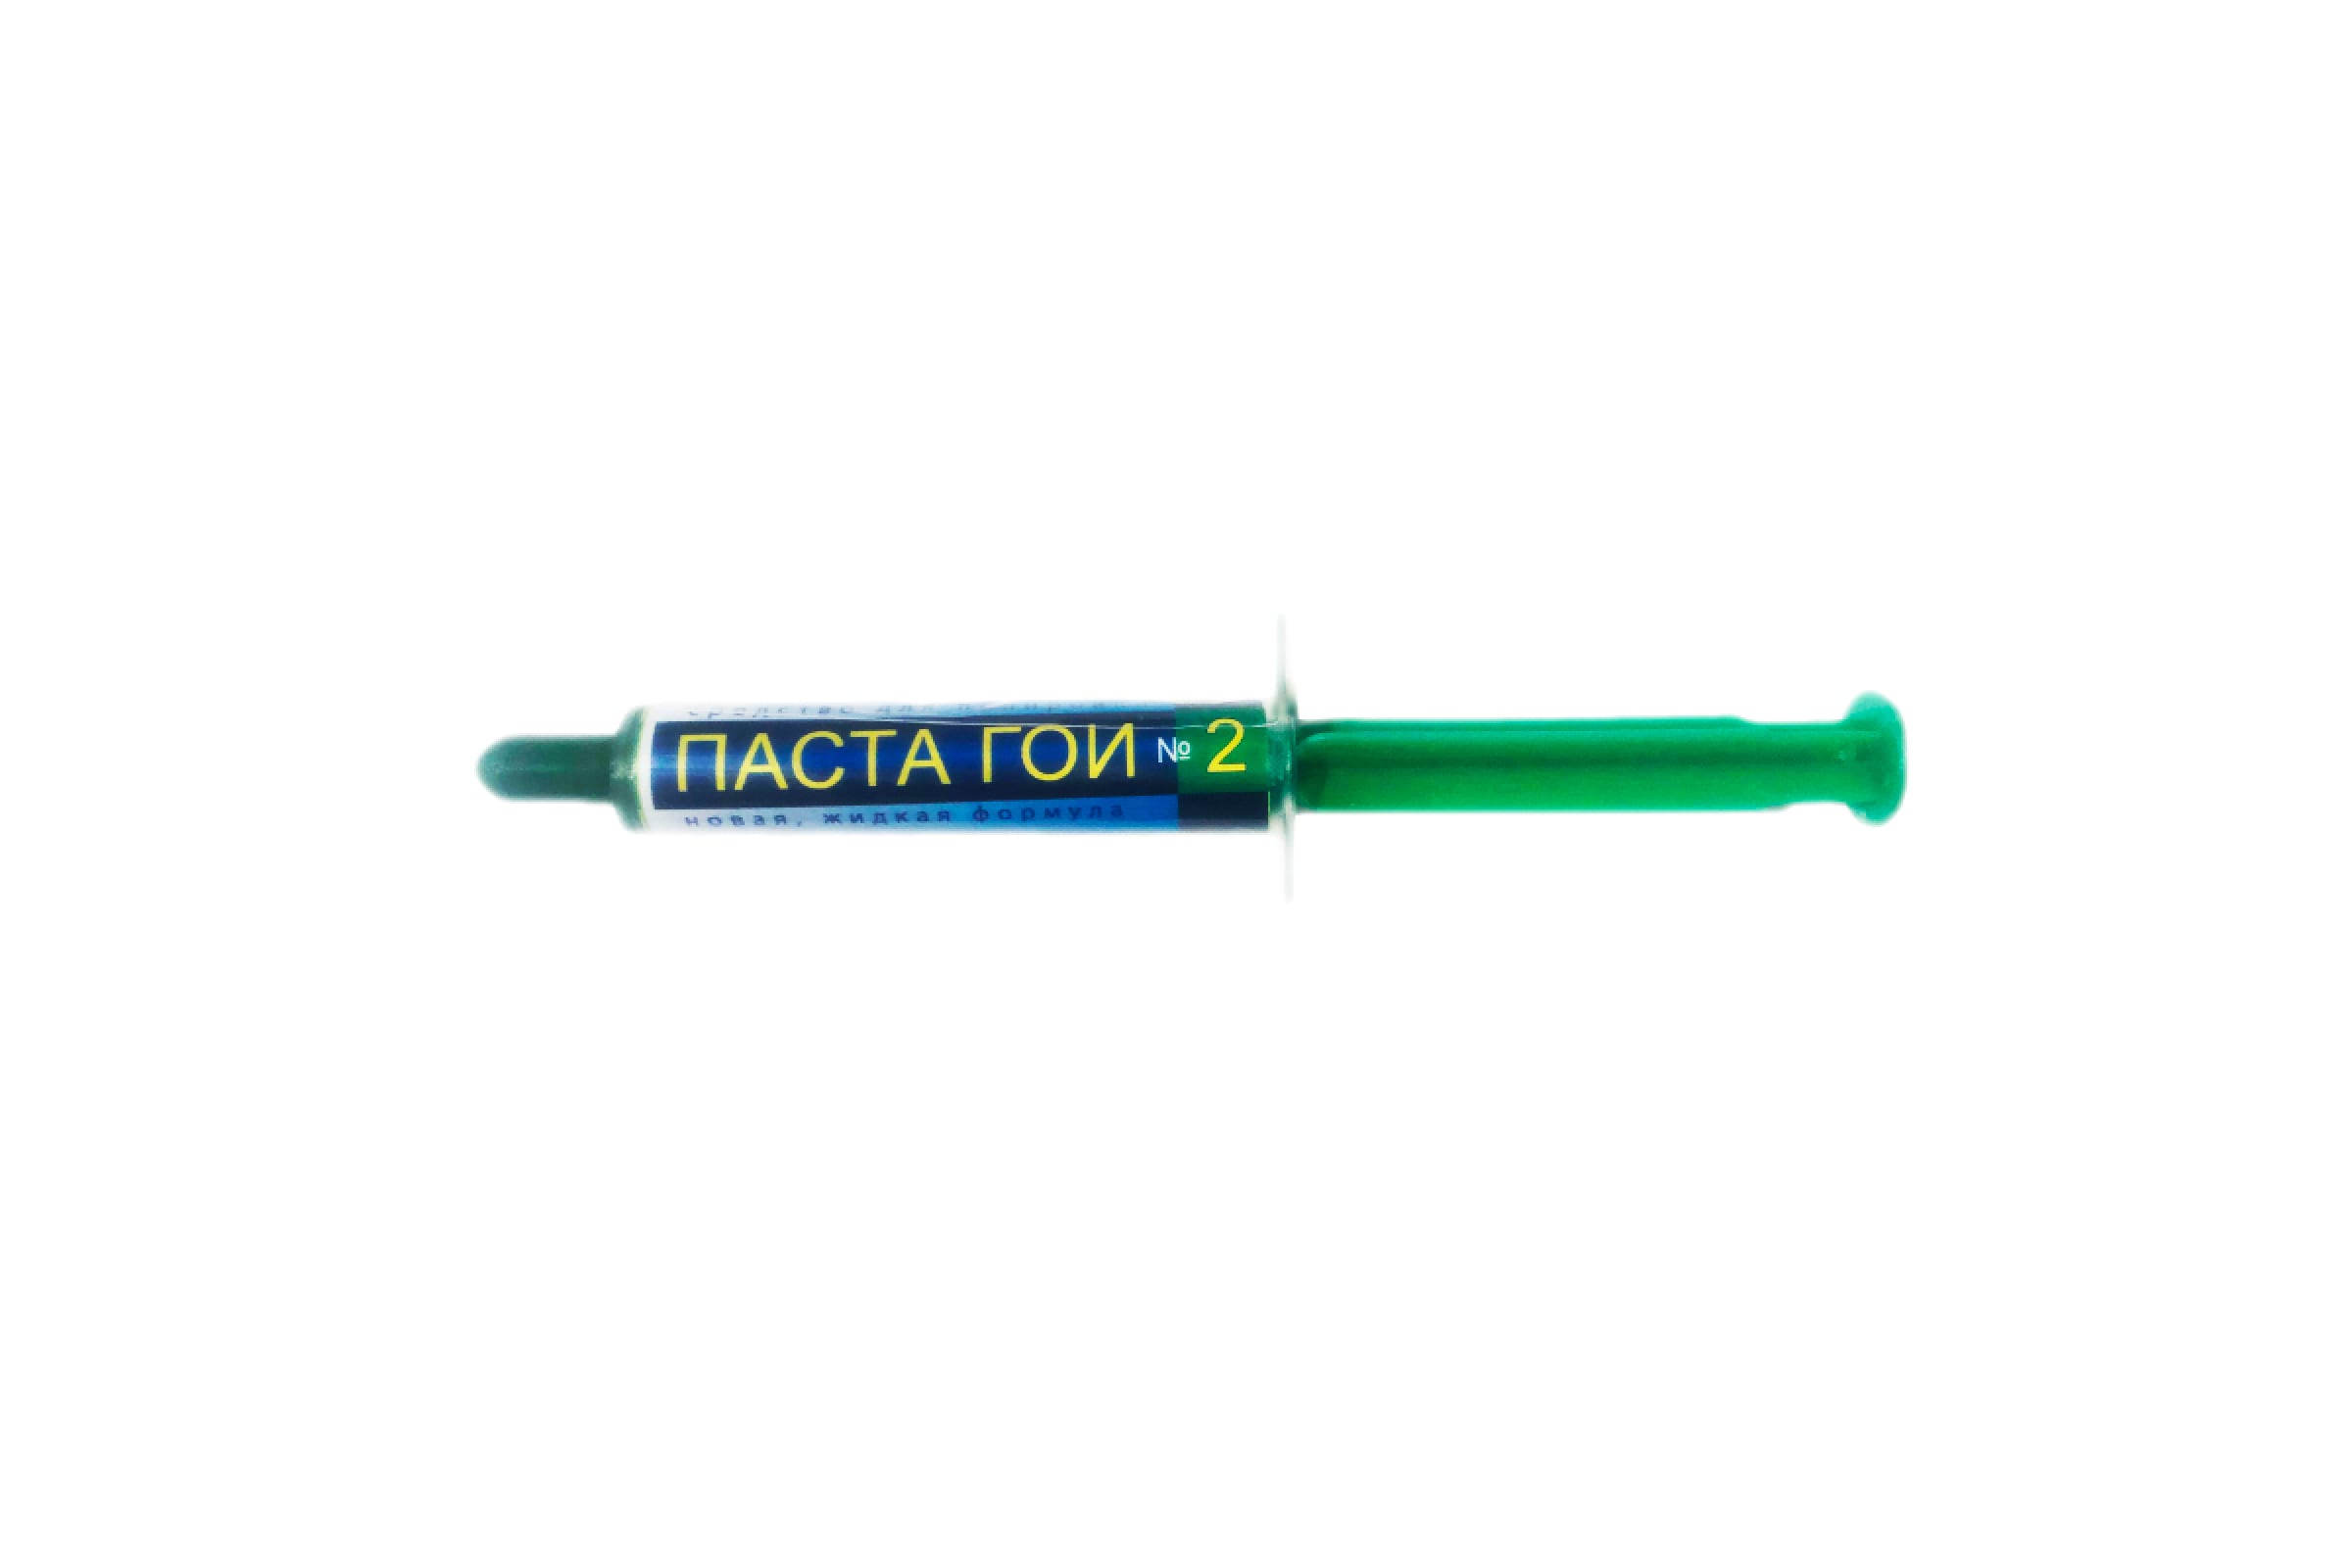 Connector Connector паста гои мягкая шприц, блистер PAGO-SHP флюс лти 120 lux 500 мл connector lti 120lux 500